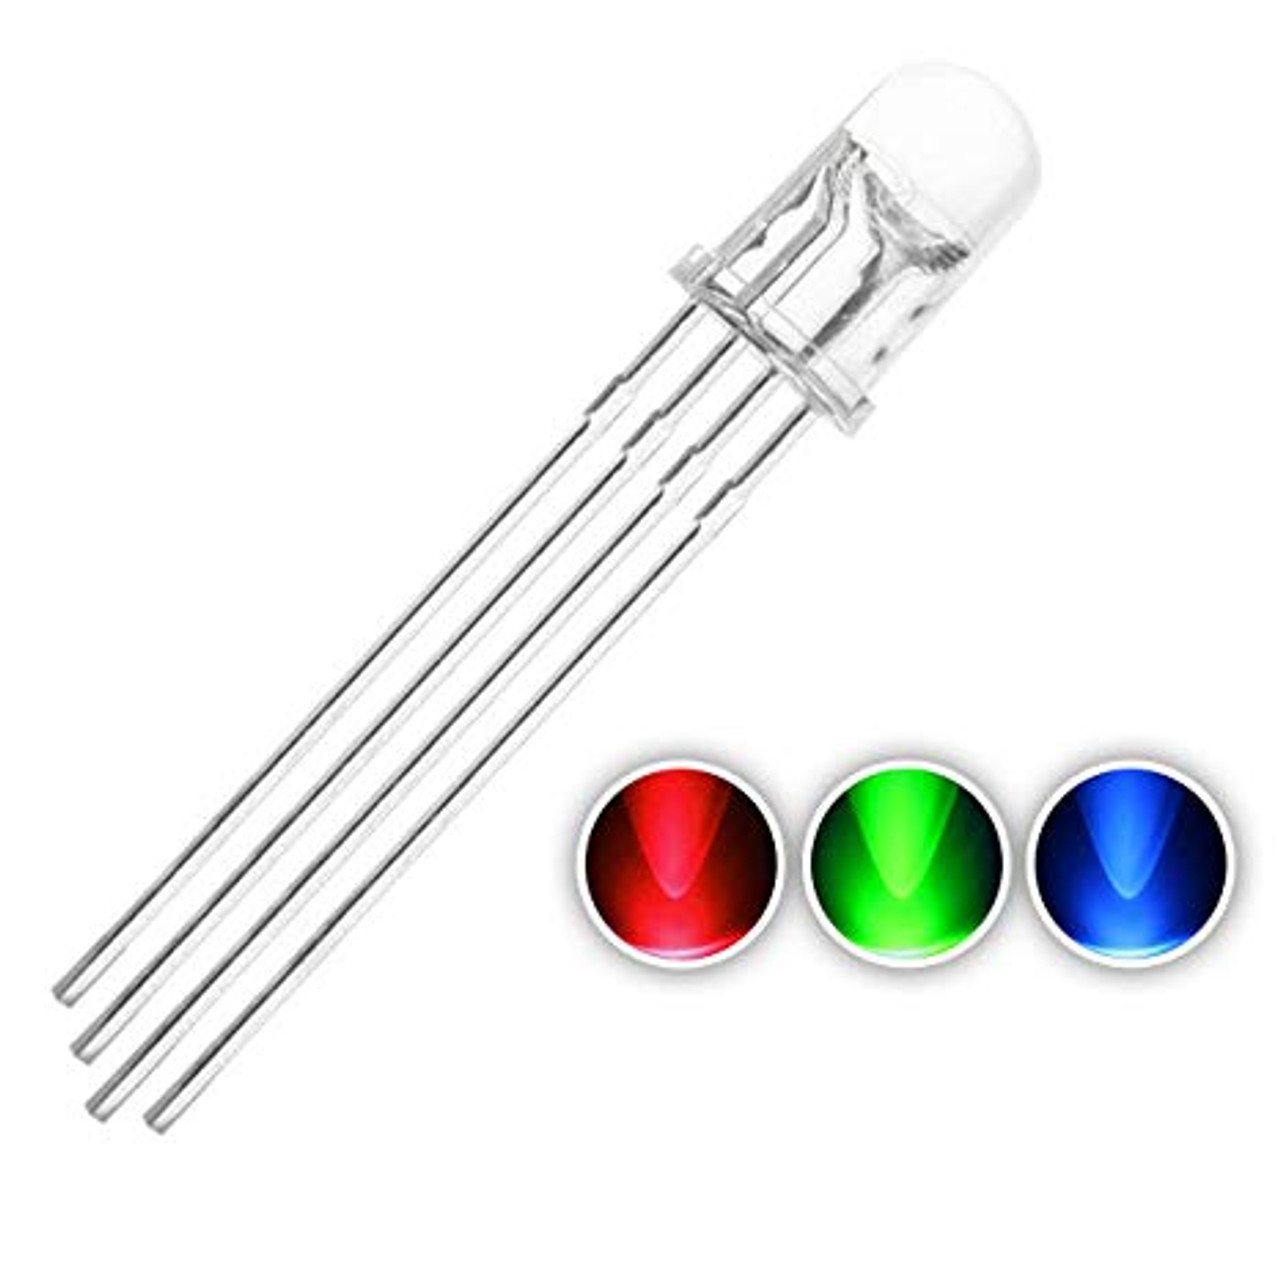 5mm LED - Tri-colour Red/Green/Blue (Common Cathode)